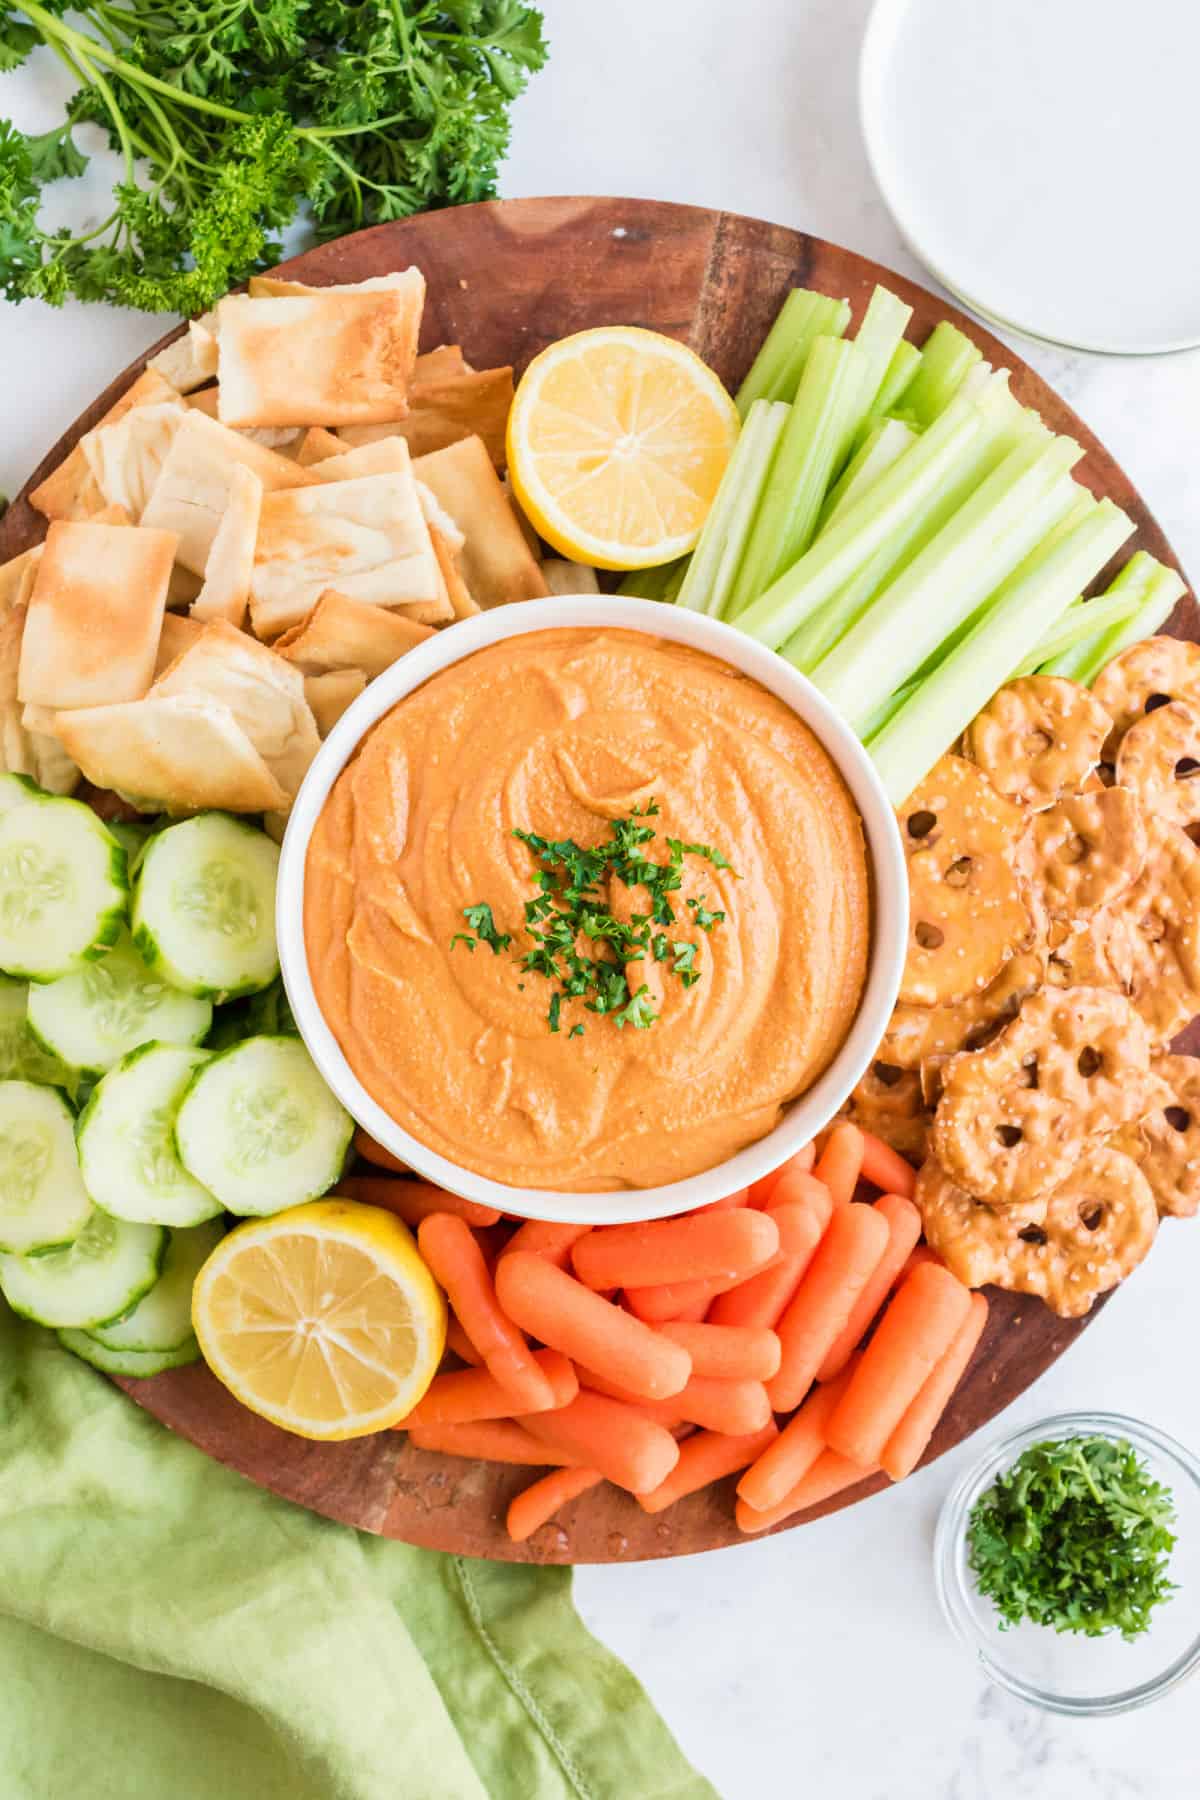 Red pepper hummus served with a platter of fresh vegetables and pita chips.